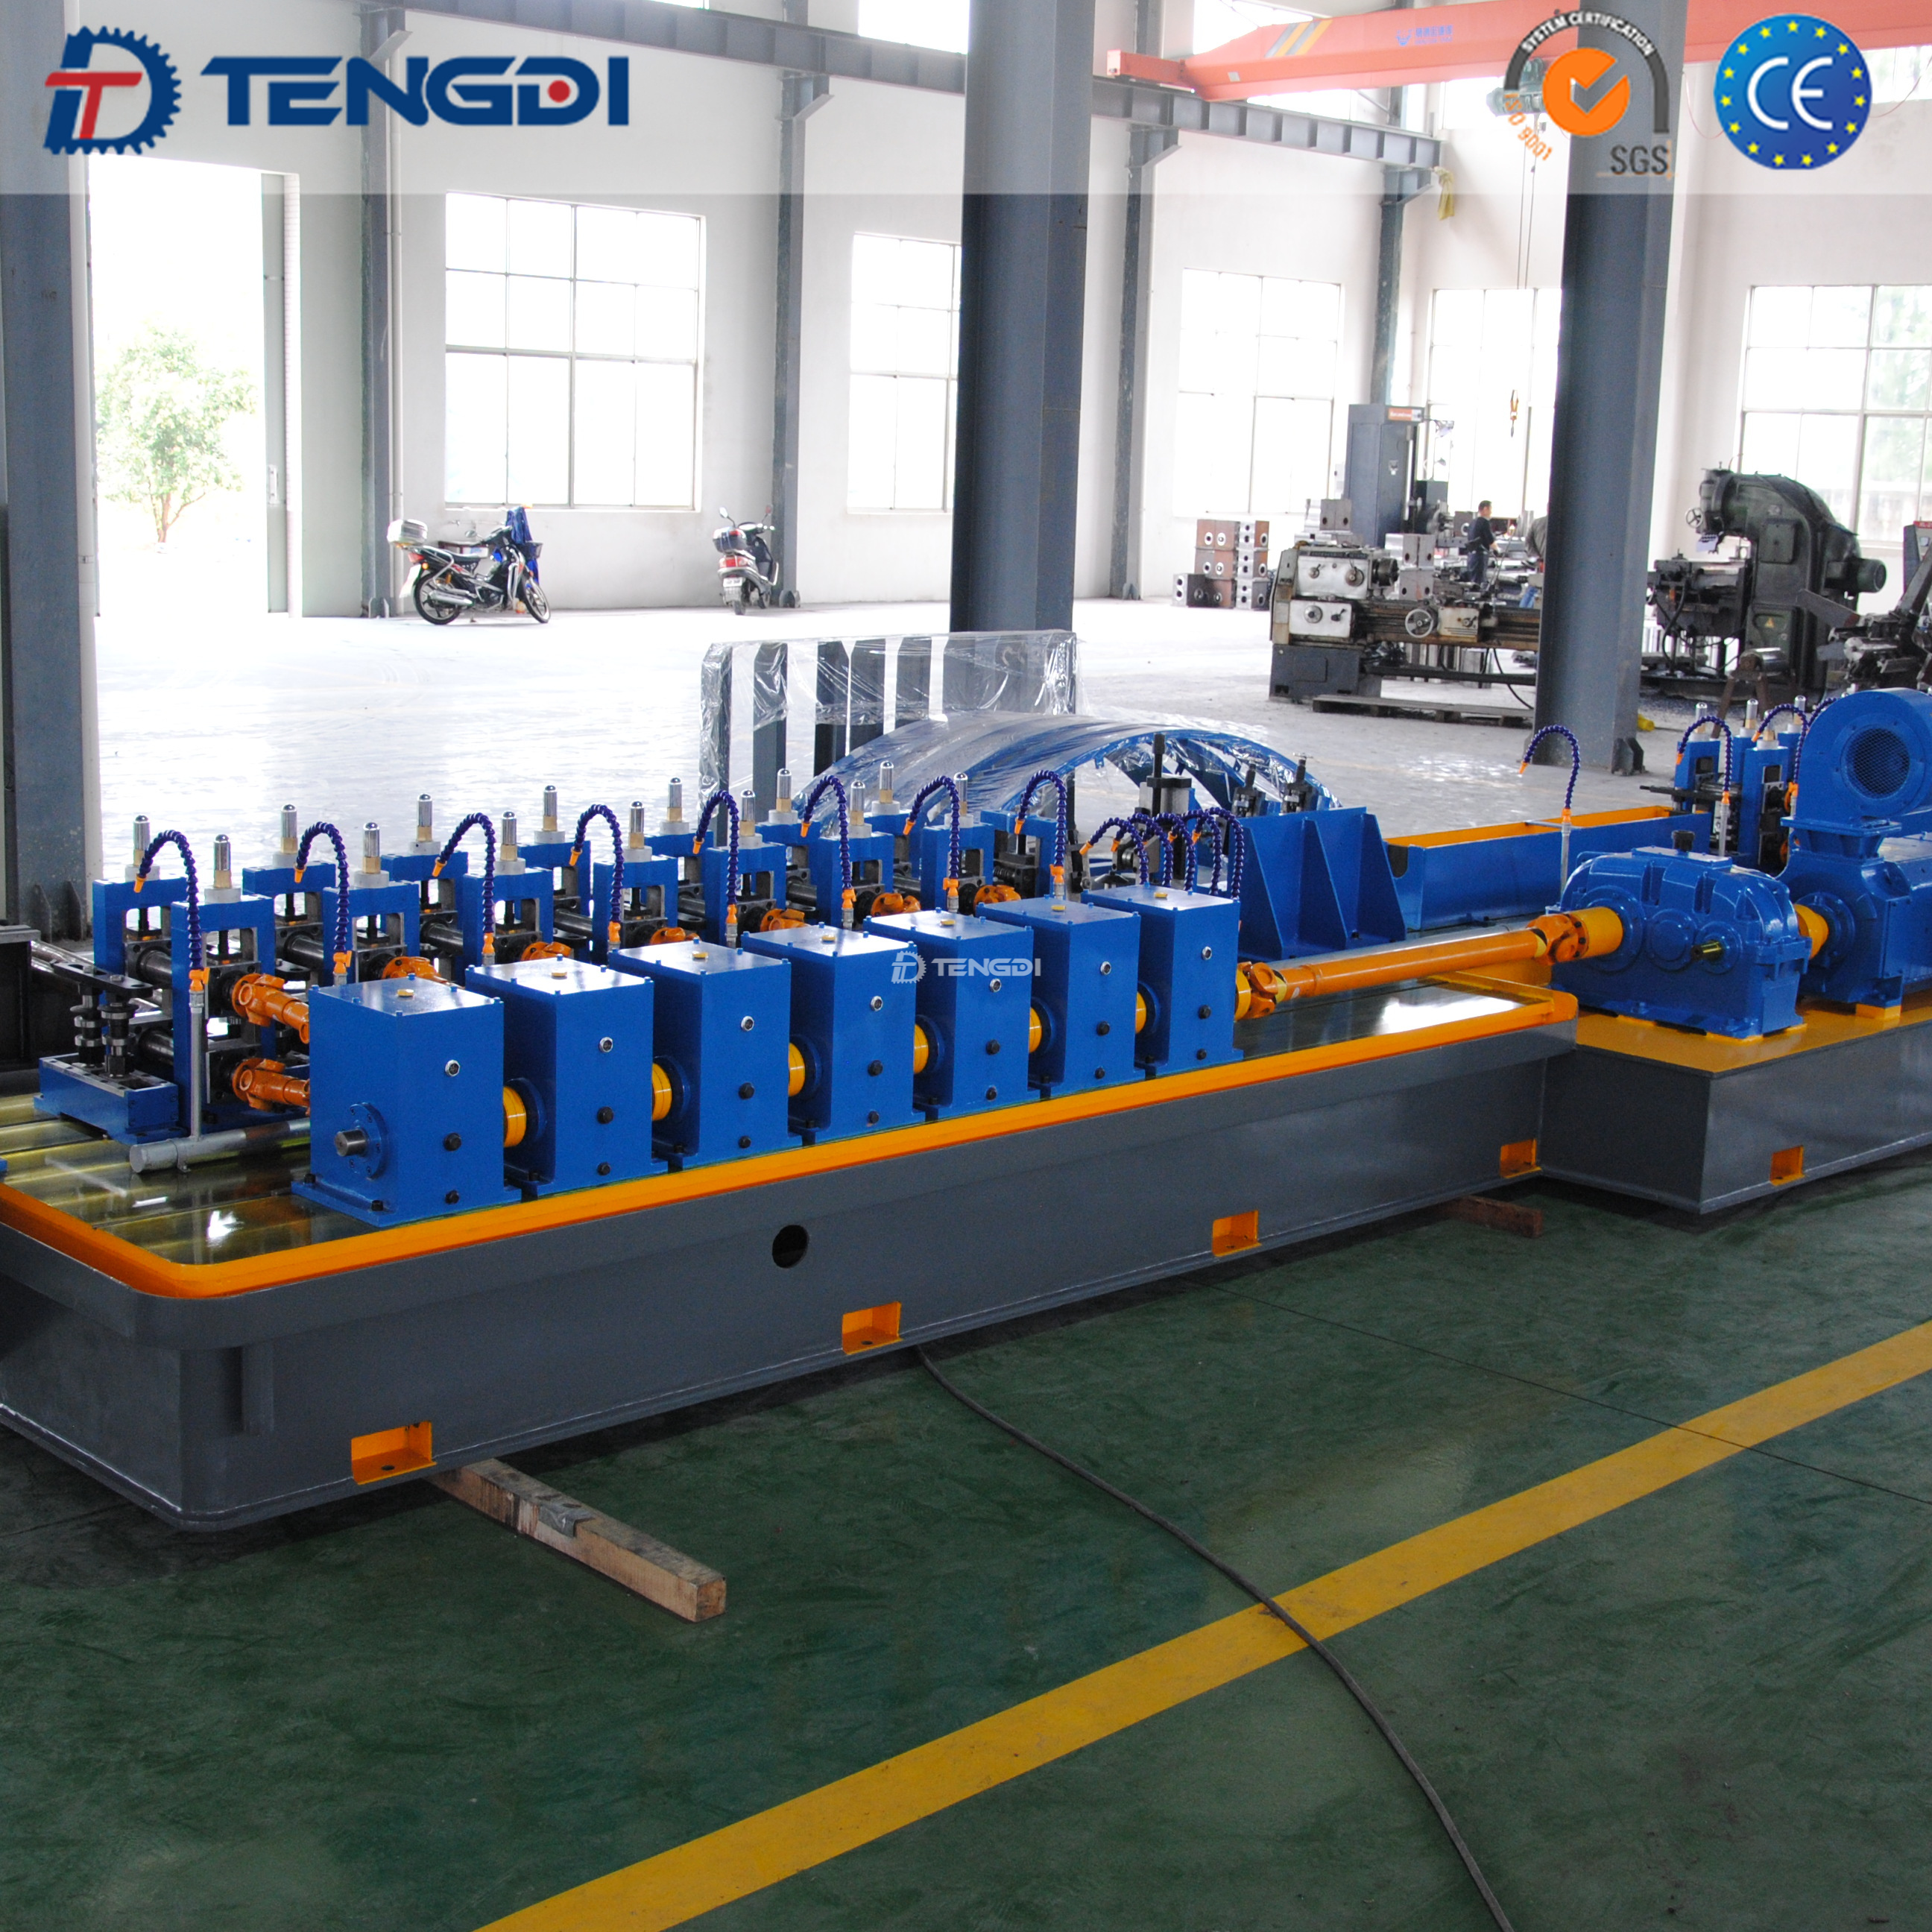 HG32 High Frequency Welding ERW Steel Tube Mill / Erw Tube Mill